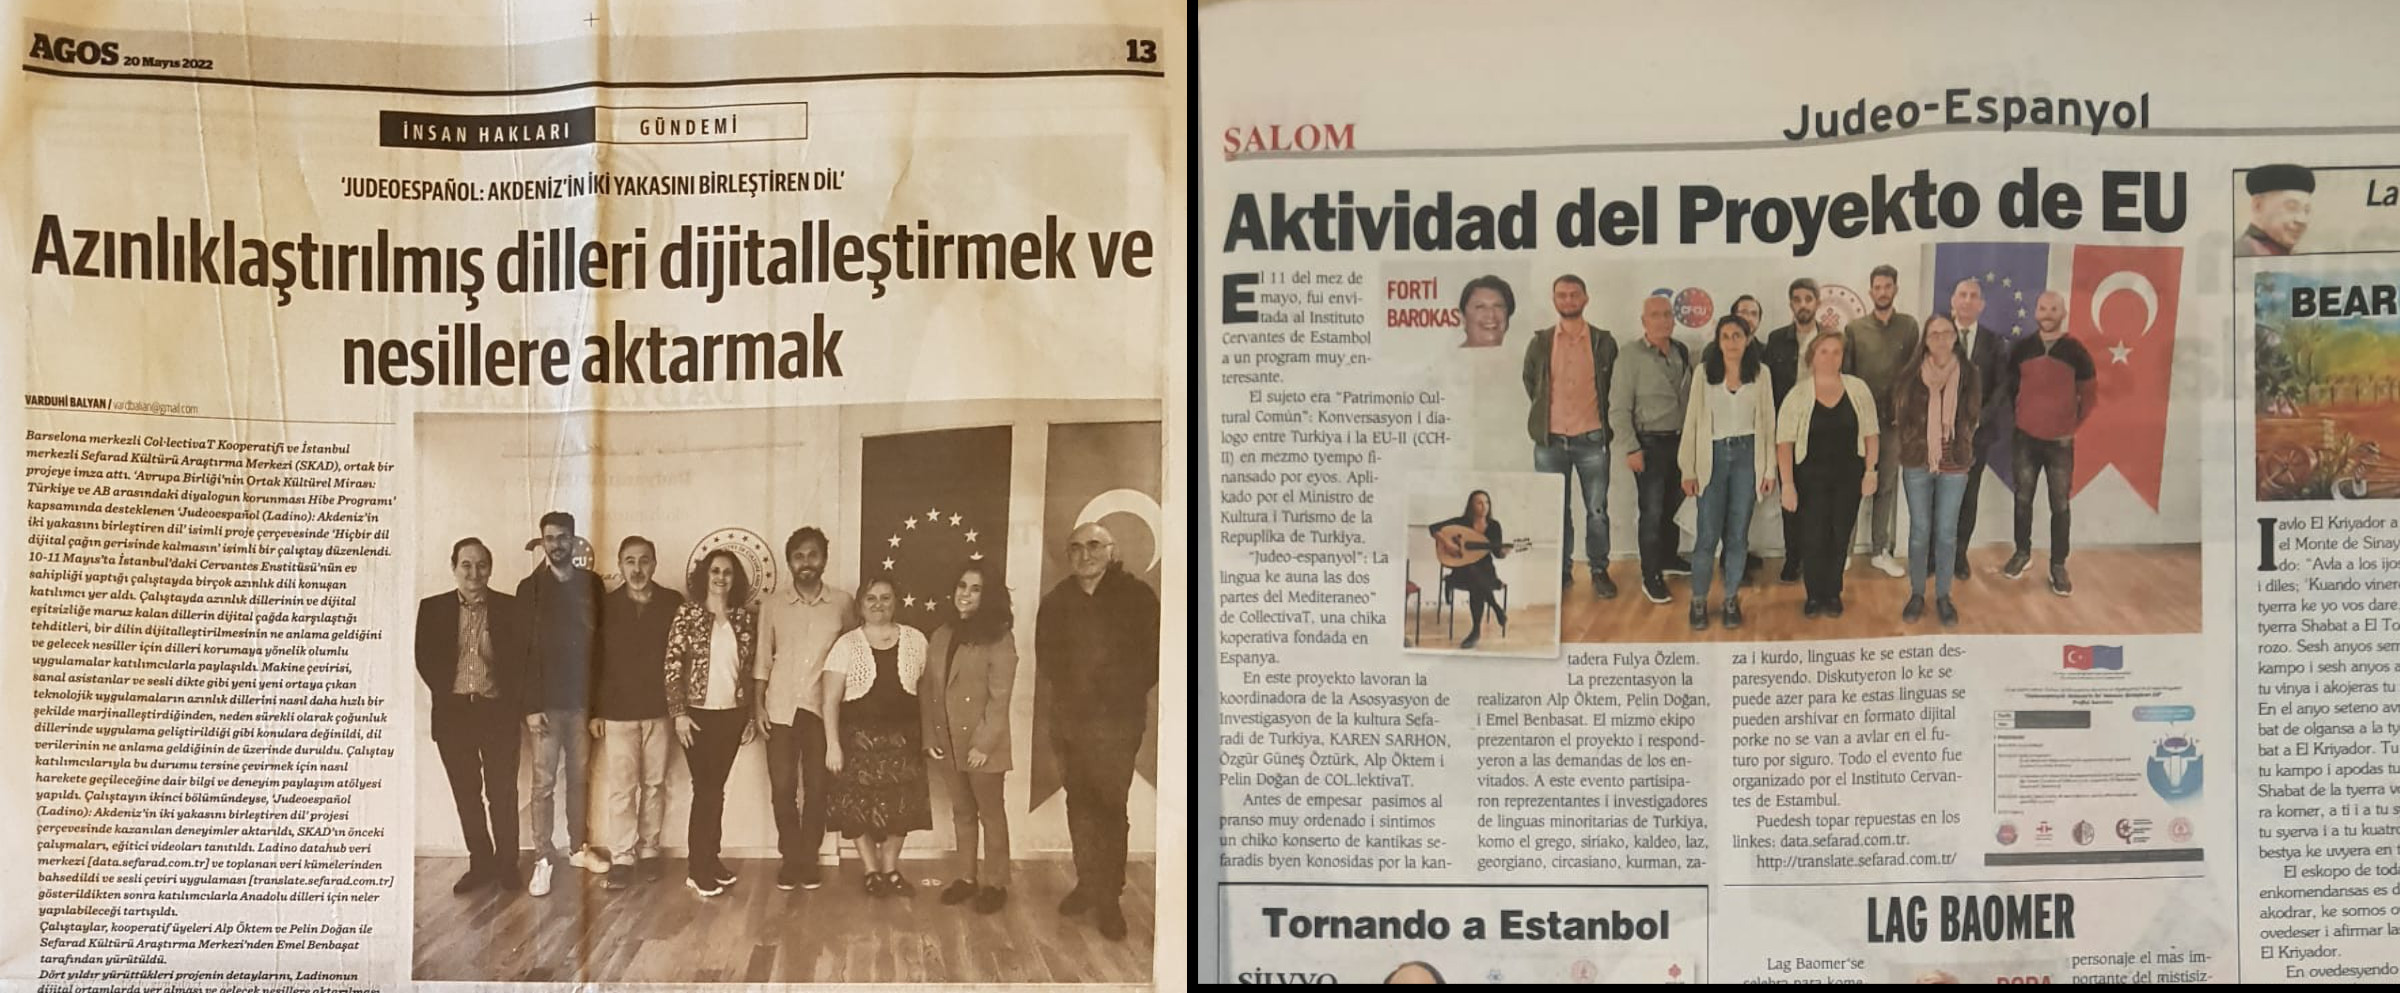 Newspapers talking about the project